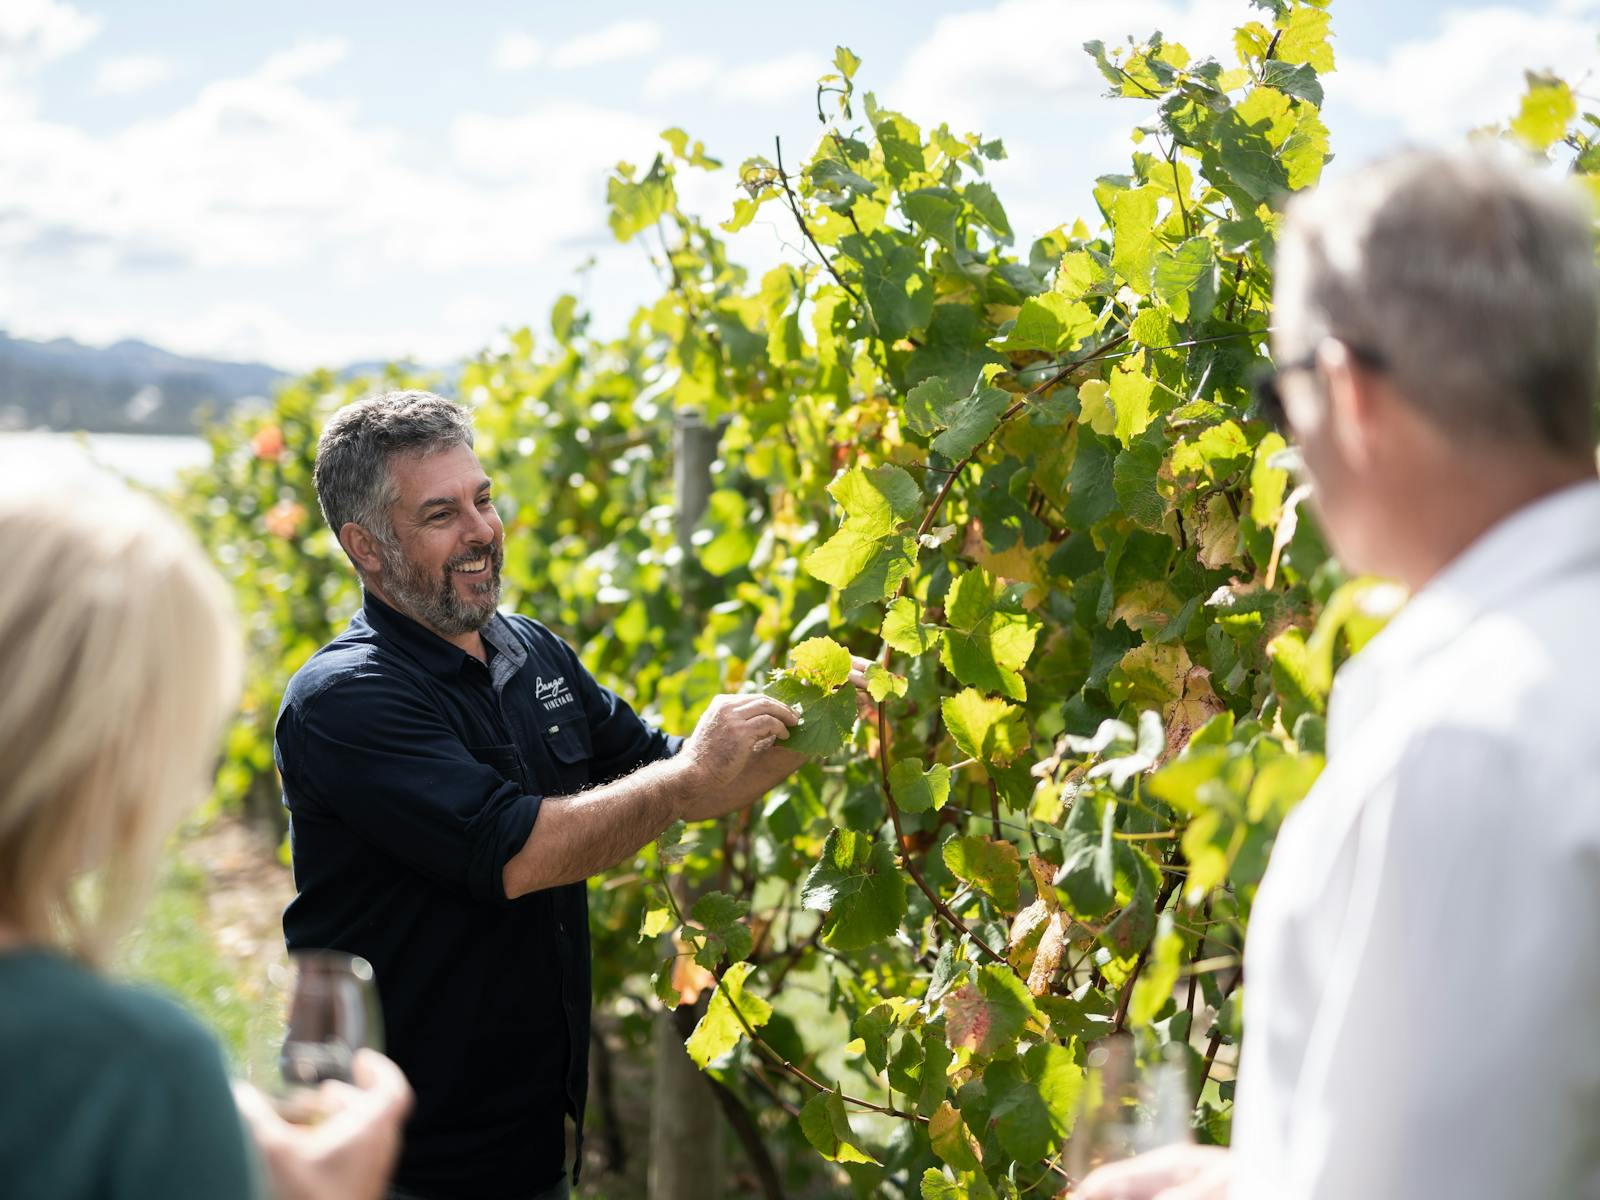 Learn about Bangor vineyard and our wines while strolling through the vines.